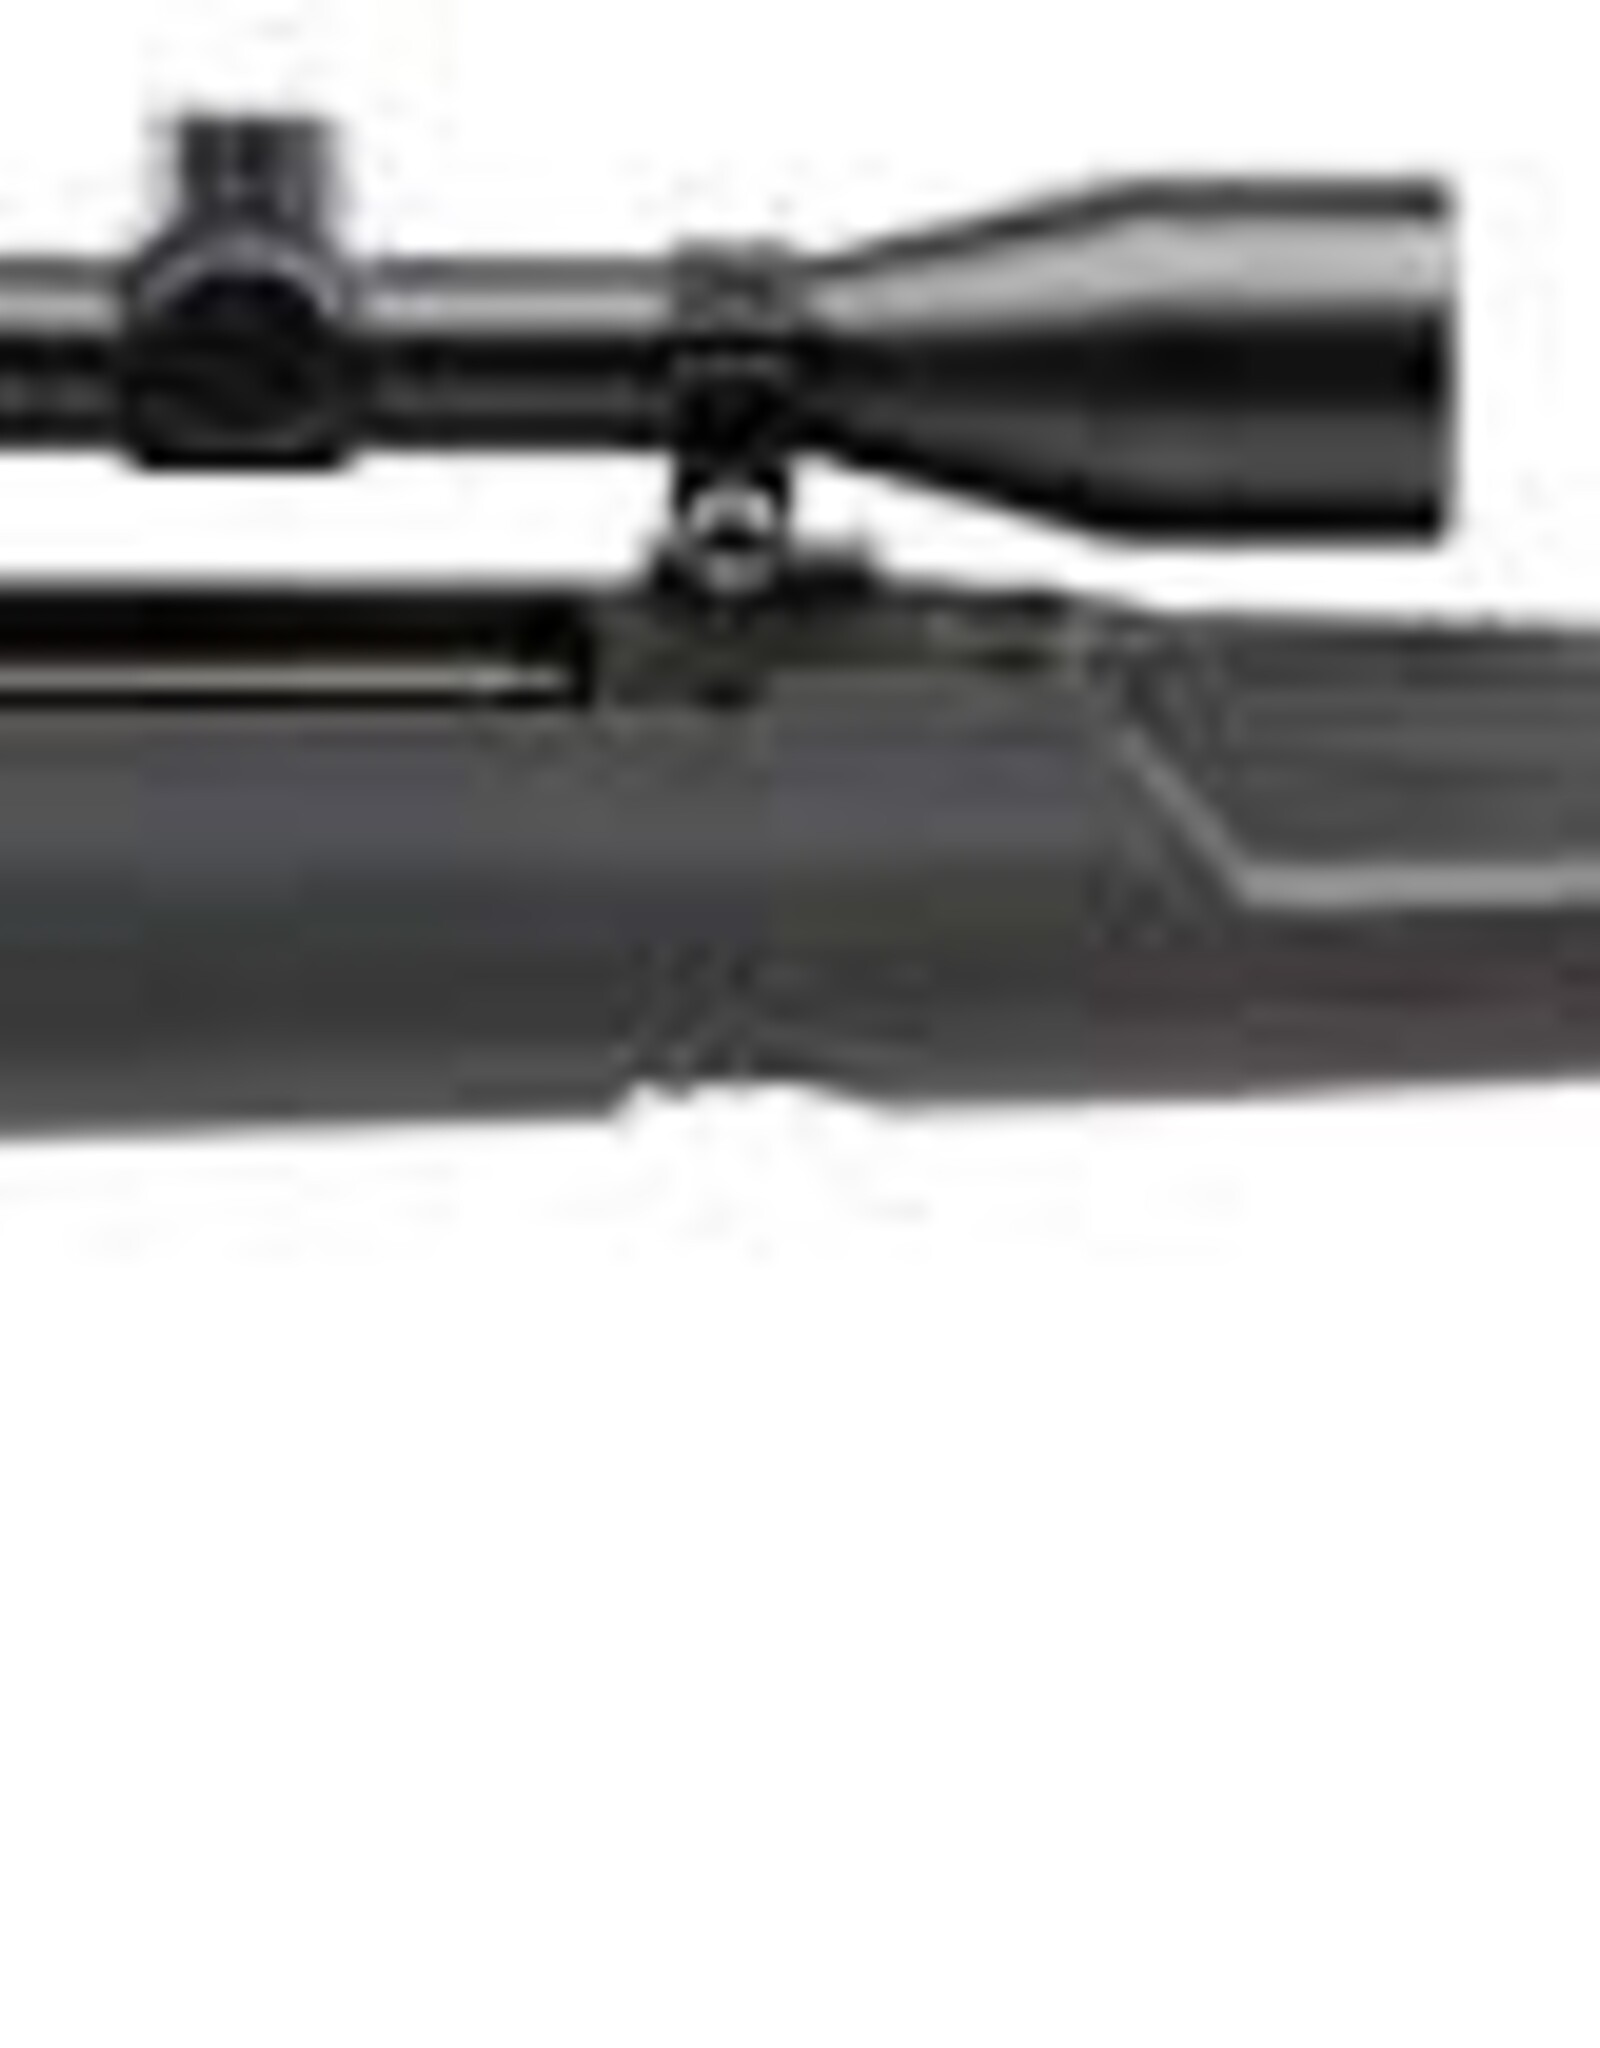 Savage Axis XP Bolt Action Rifle